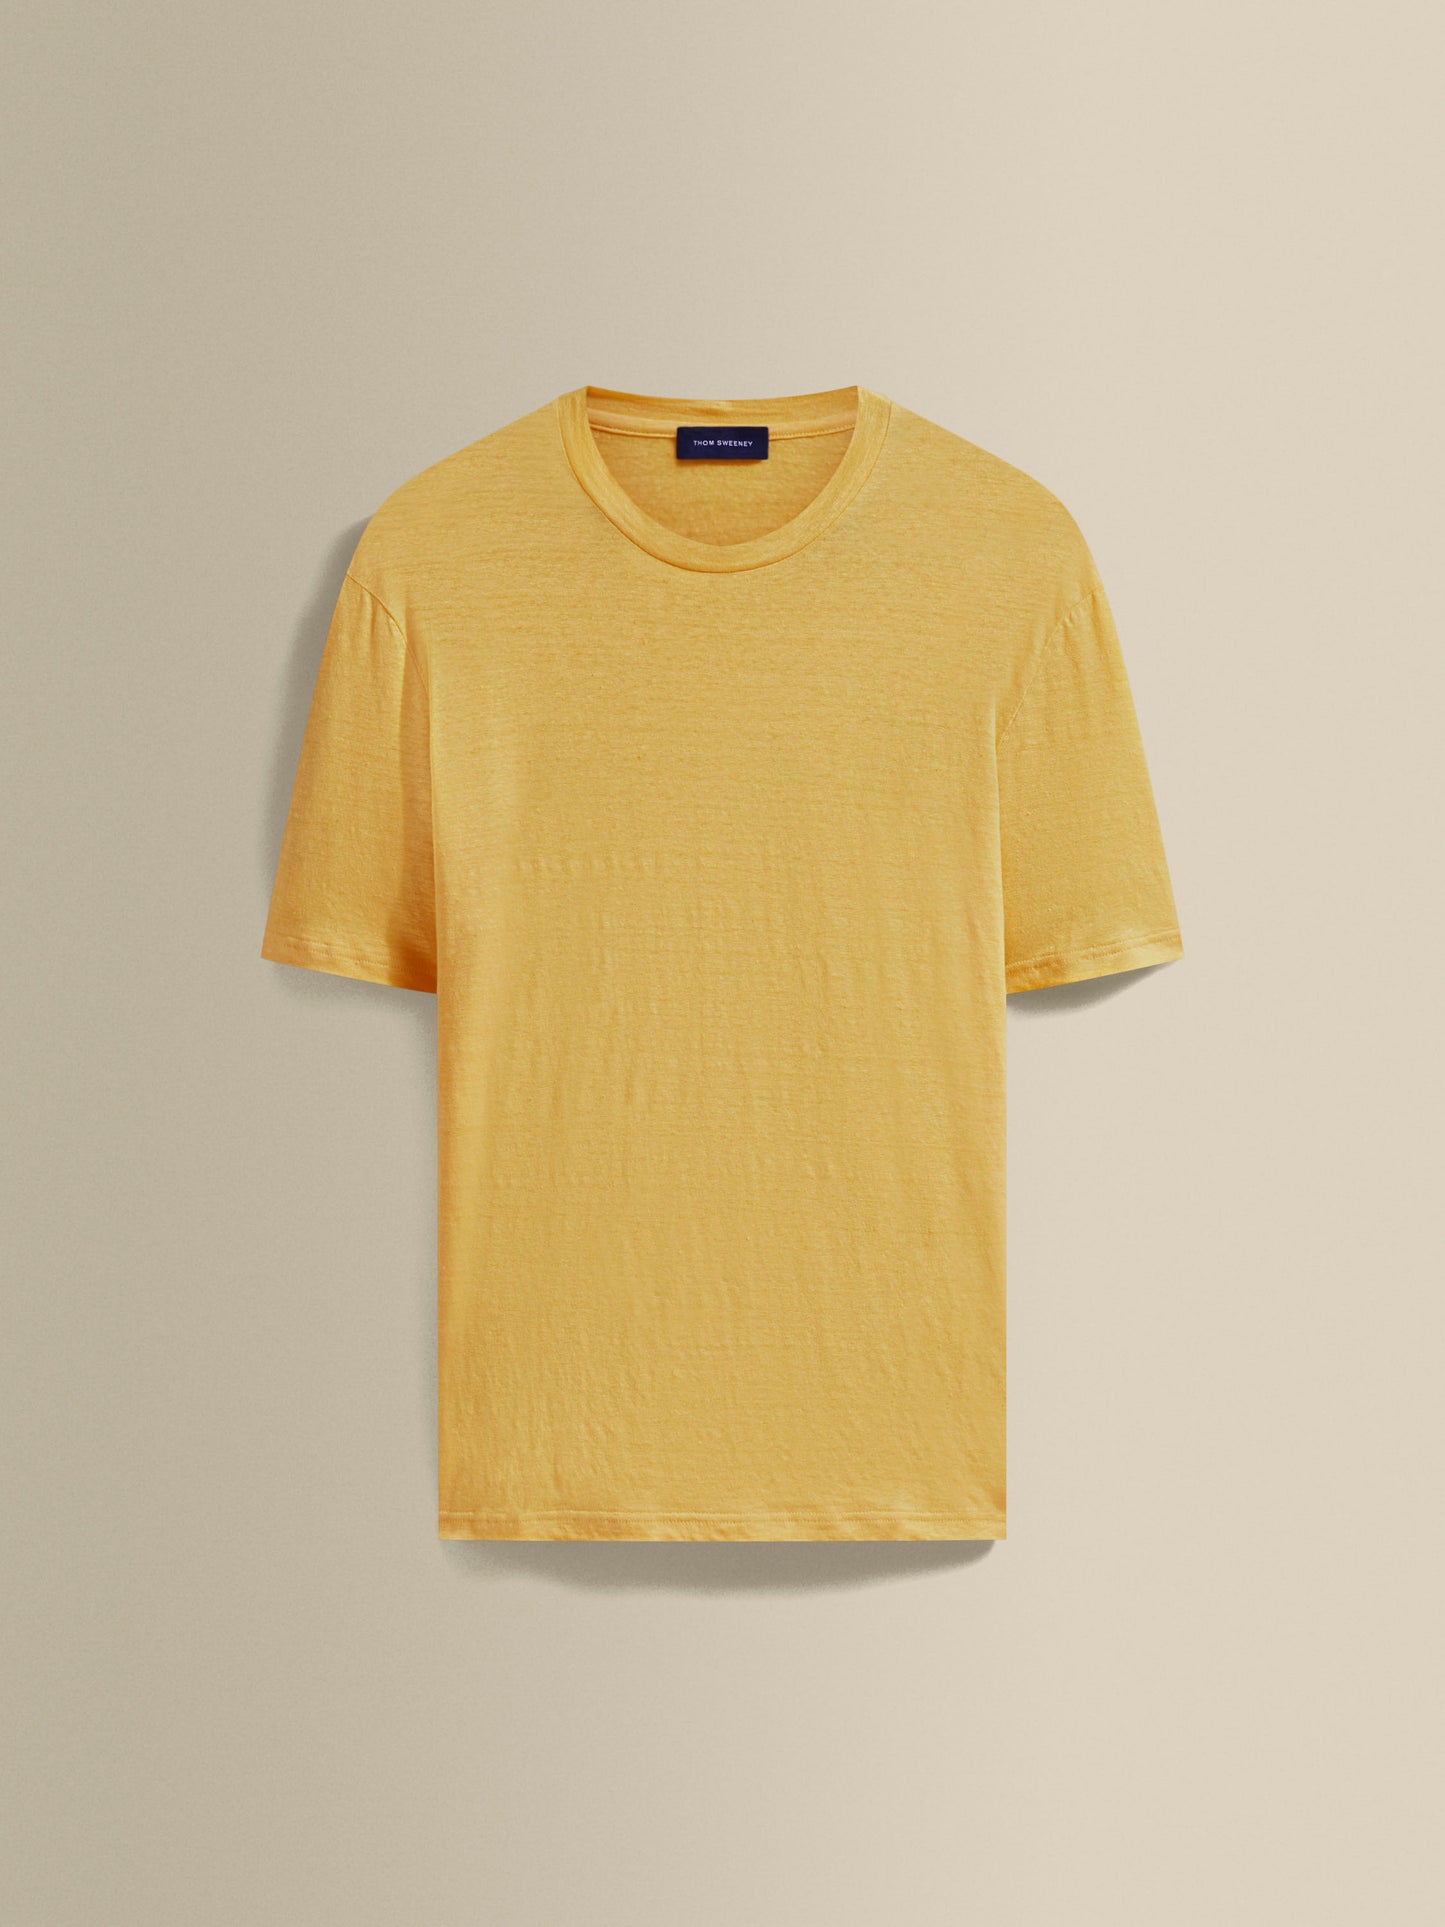 Linen Jersey T-Shirt Canary Yellow Product Image